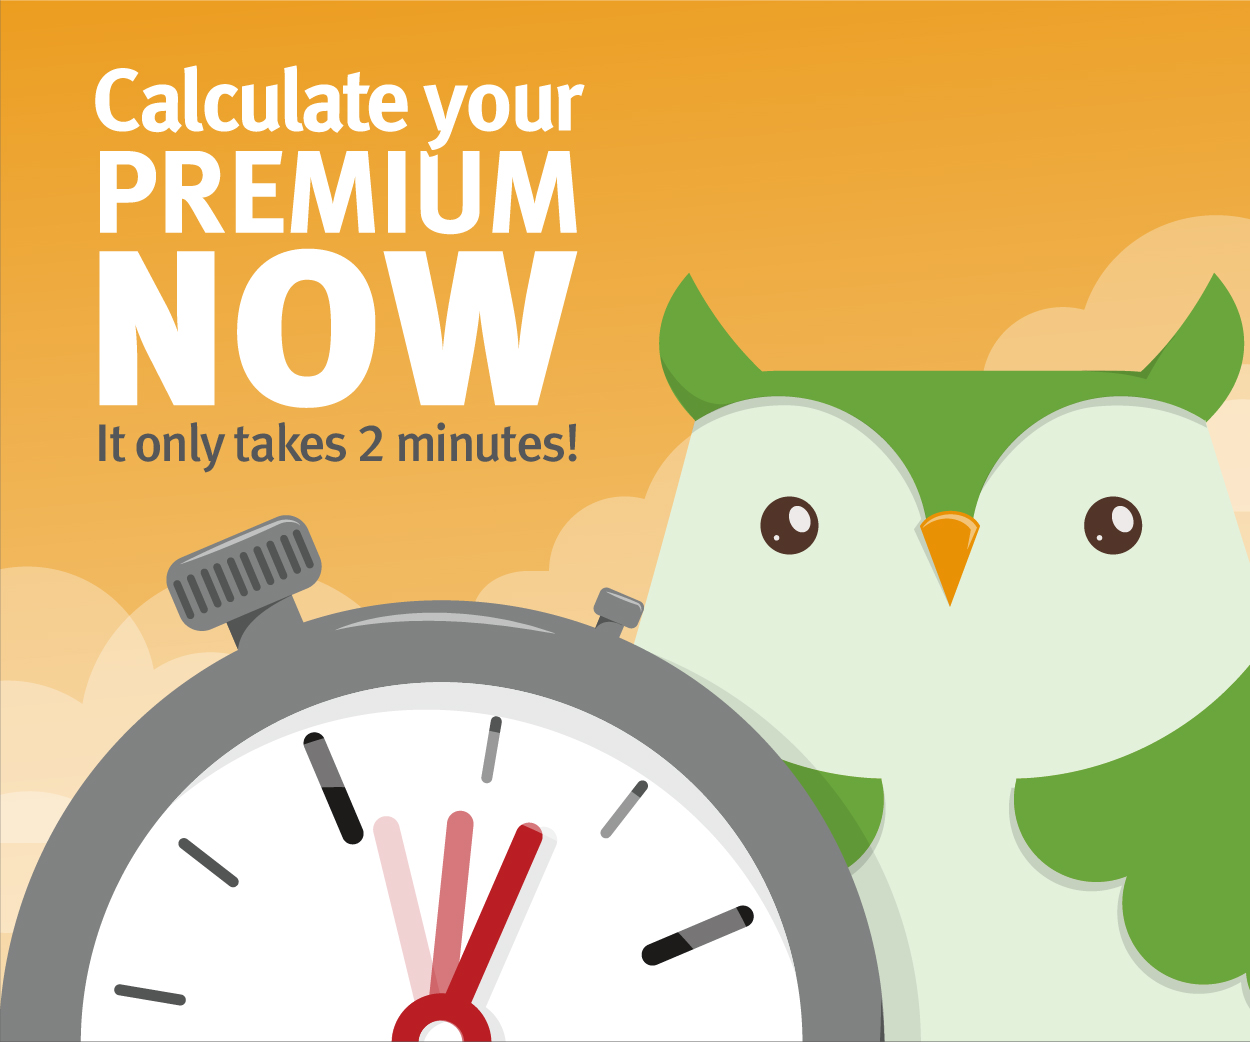 Calculate your premium now. It only takes 2 minutes!